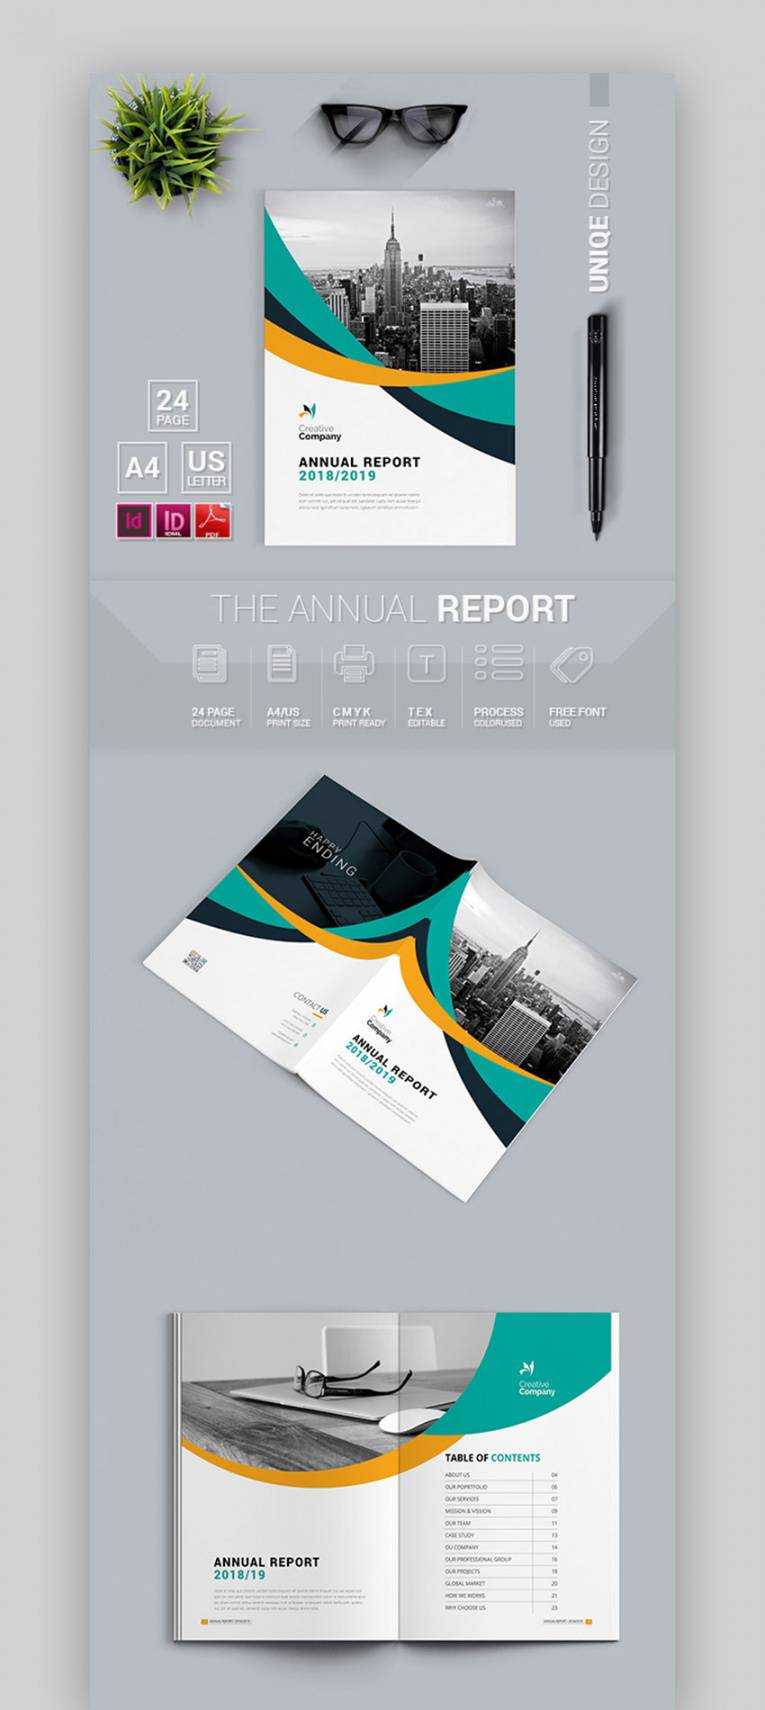 15 Annual Report Templates With Awesome Indesign Layouts Intended For Free Annual Report Template Indesign